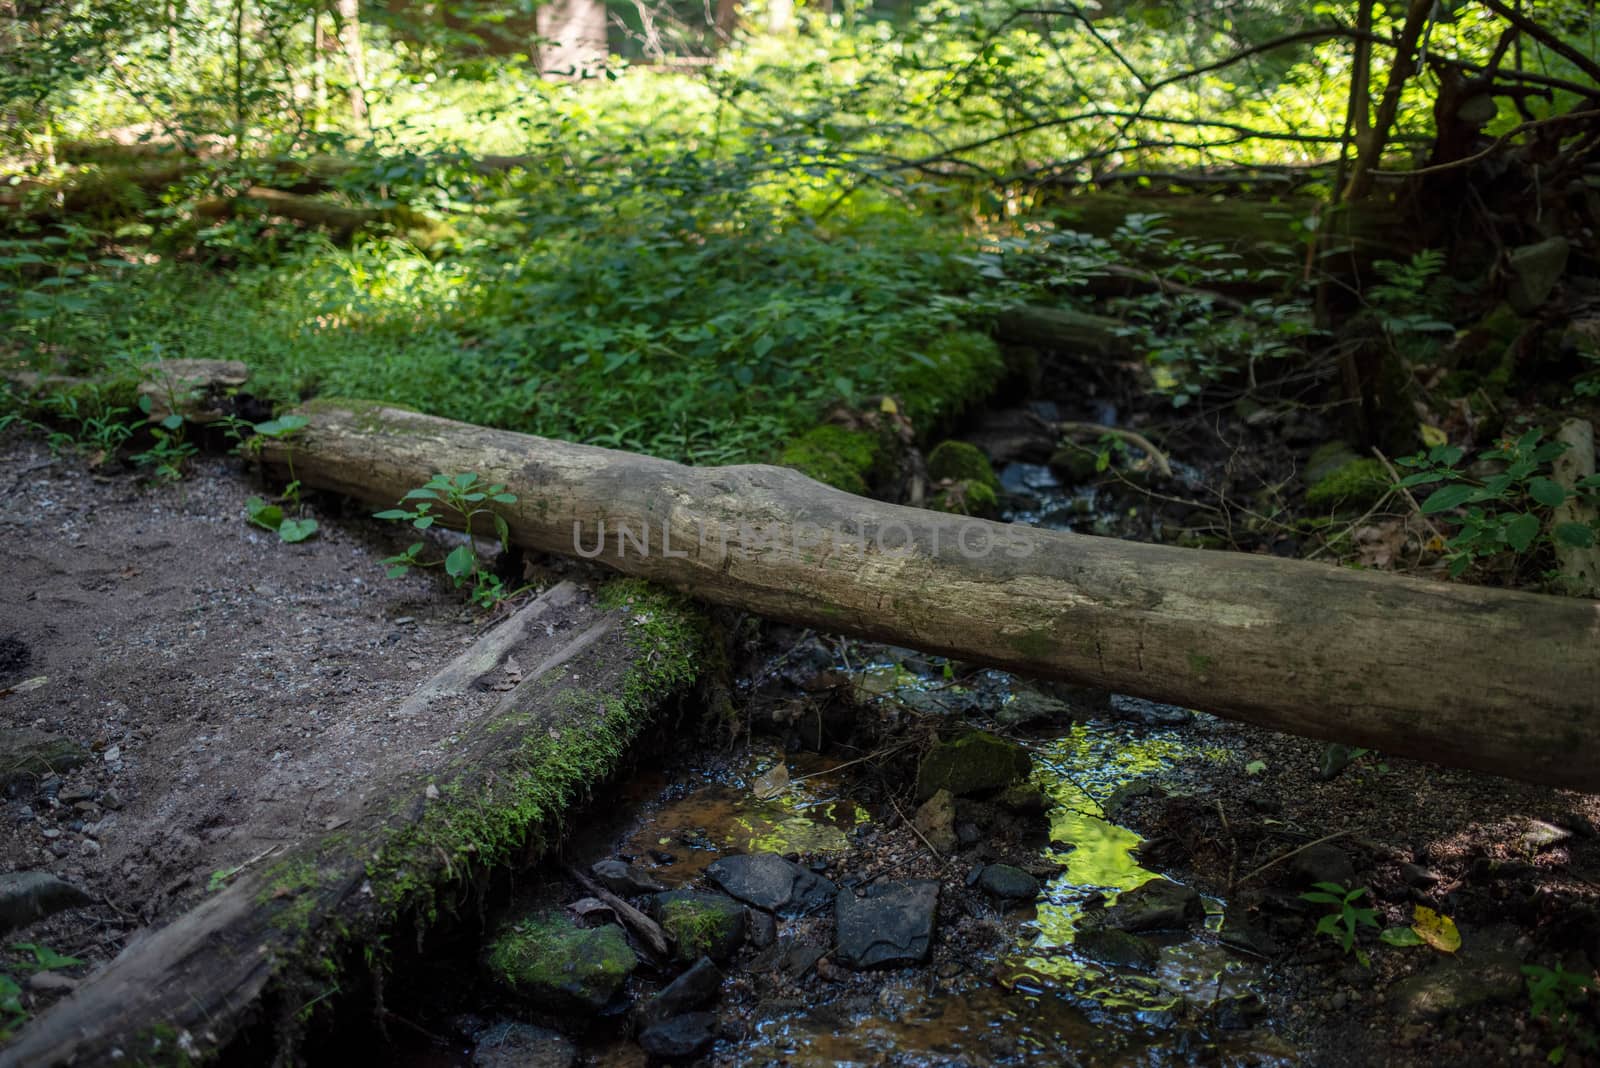 Focus on foreground trail and stream, with log footbridge and green foliage reflection. Green background with copy space